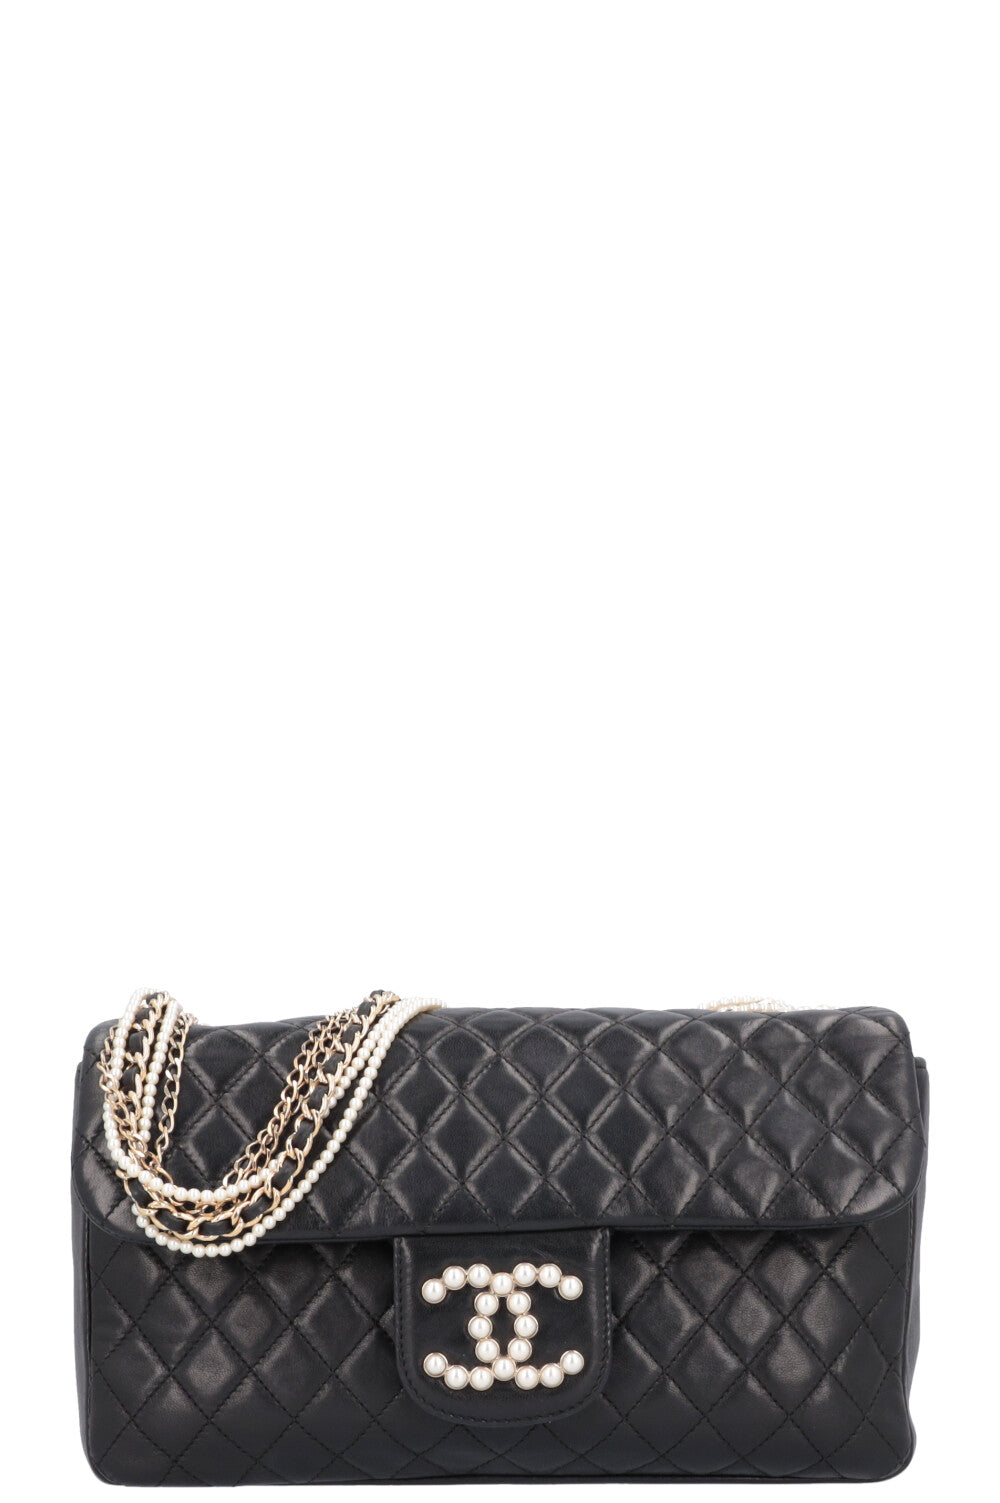 CHANEL_Westminister_Single_Flap